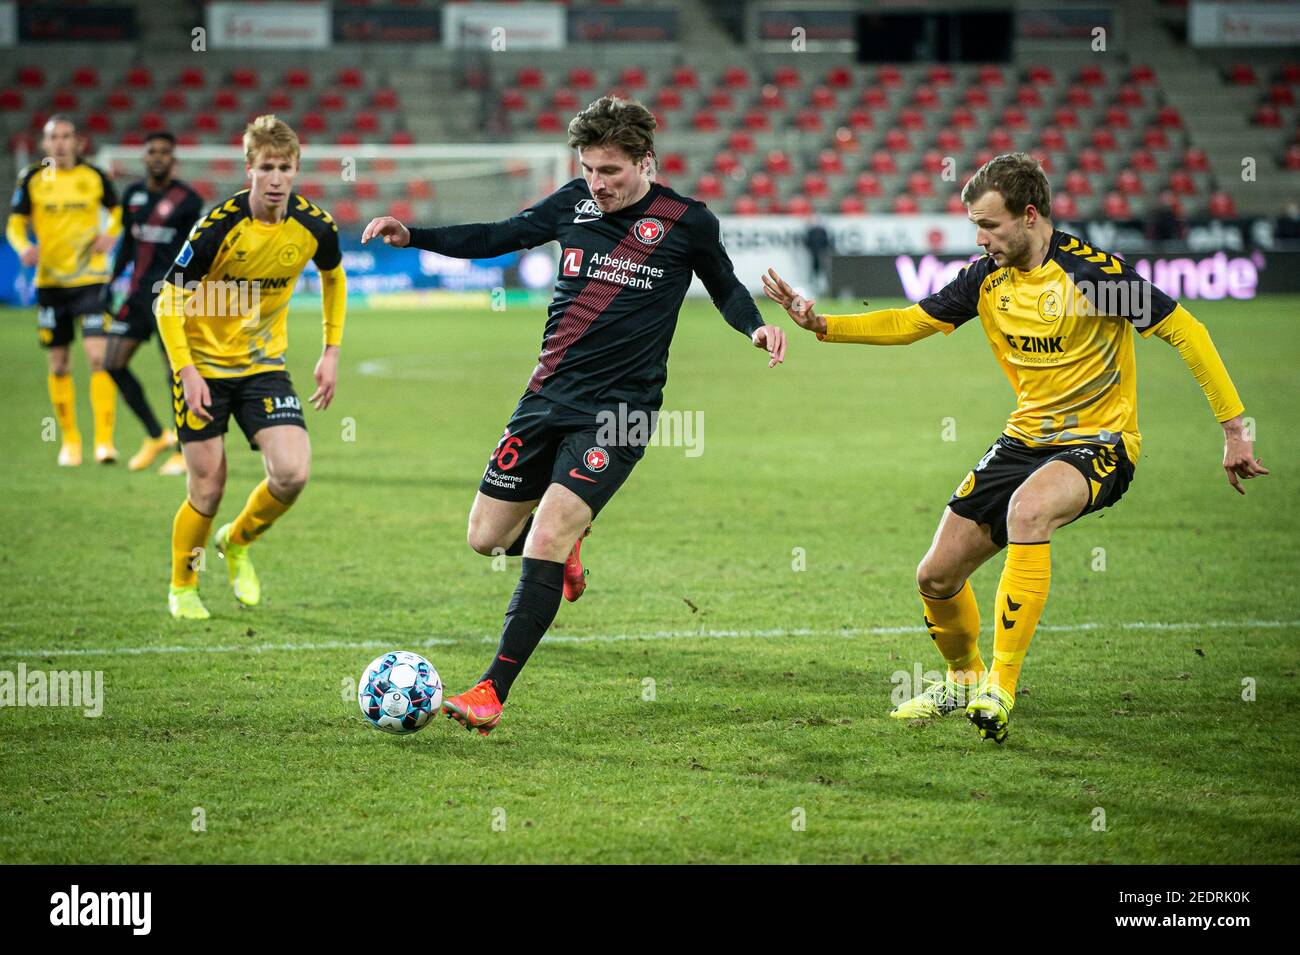 Herning, Denmark. 14th Feb, 2021. Anders Dreyer (36) of FC Midtjylland and  Malte Kiilerich (4) of AC Horsens seen during the 3F Superliga match  between FC Midtjylland and AC Horsens at MCH